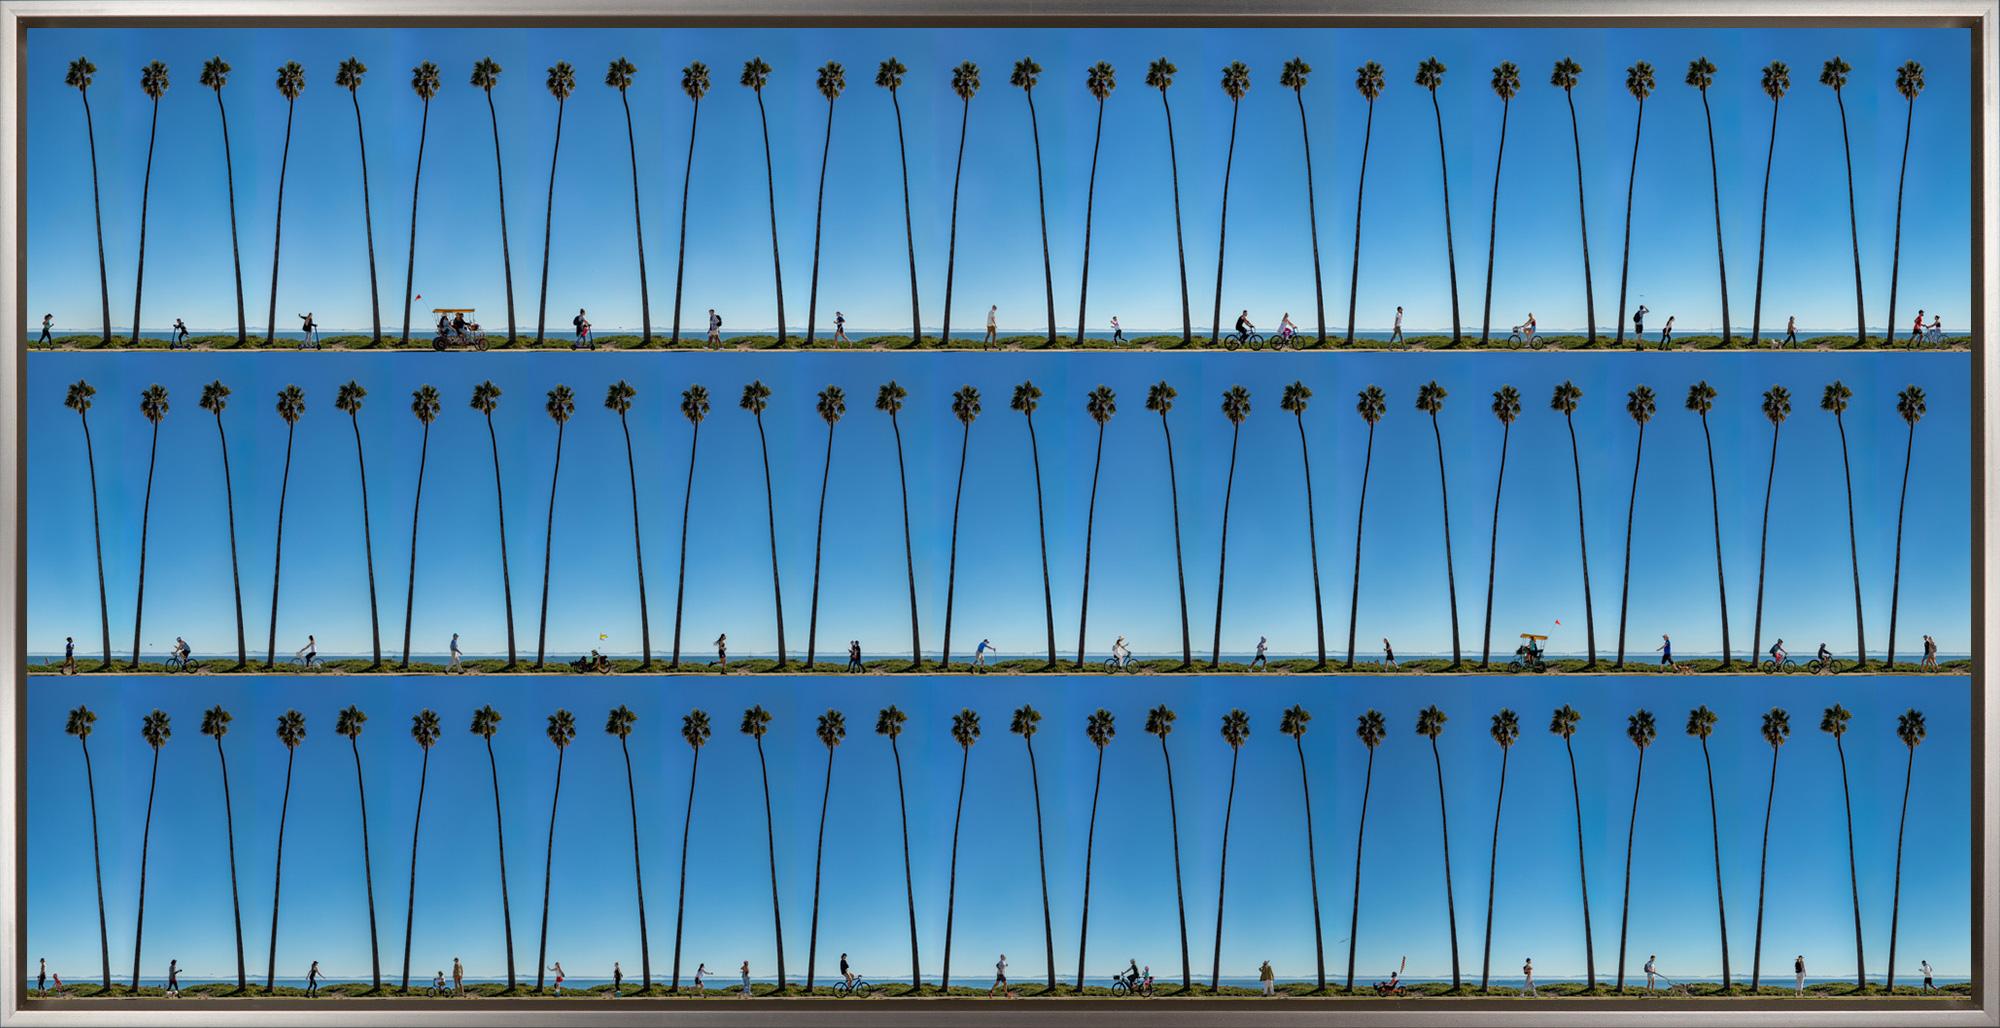 "Waterfront, Santa Barbara" is a framed photograph on aluminum by Xan Padron, depicting a compilation of walking figures set against a compelling shoreline with palm trees. Padron's signature technique of splicing together individual photographs to